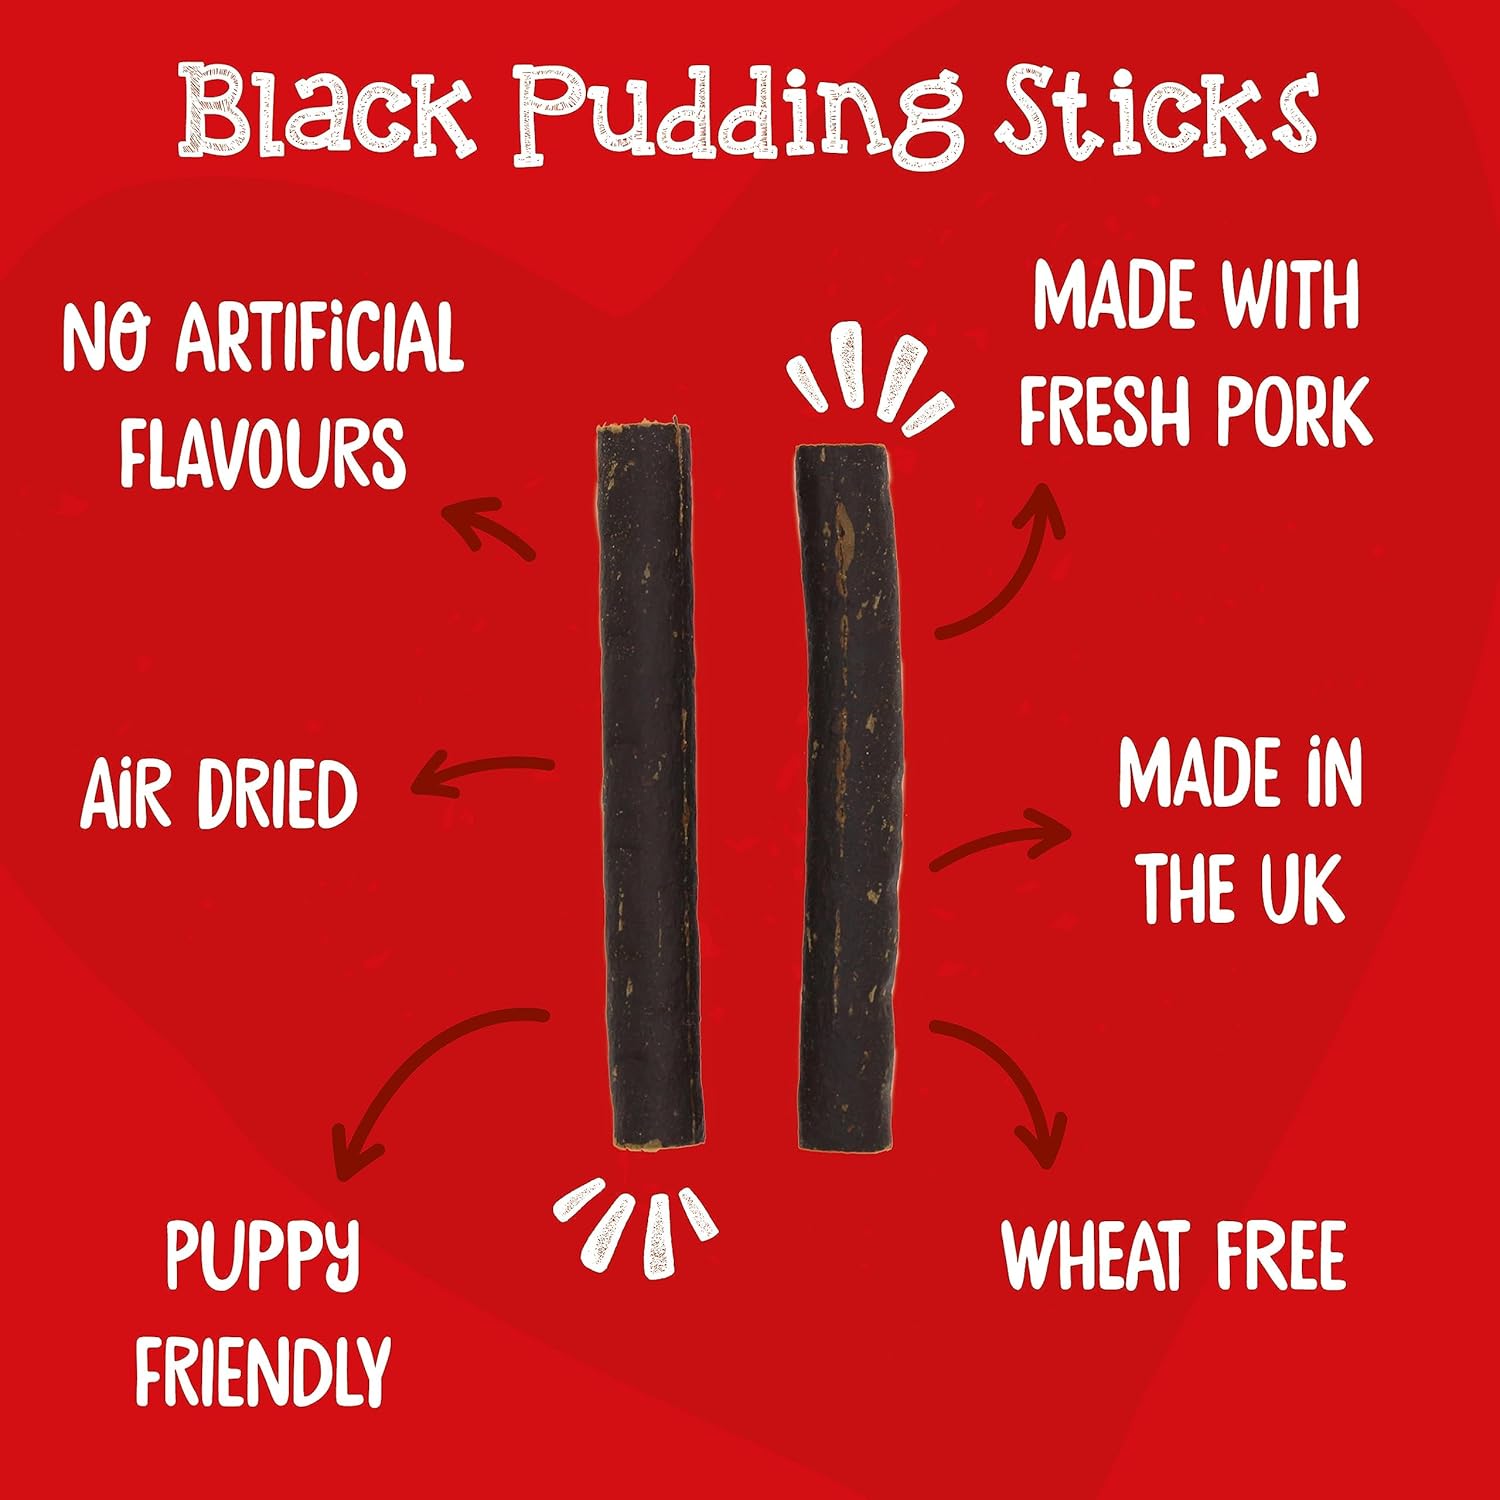 Webbox Black Pudding Sticks Dog Treats - Made with Fresh Pork, Puppy Friendly, Wheat Free Recipe, No Artificial Flavours, Made in the UK (16 x 4 Packs) :Pet Supplies